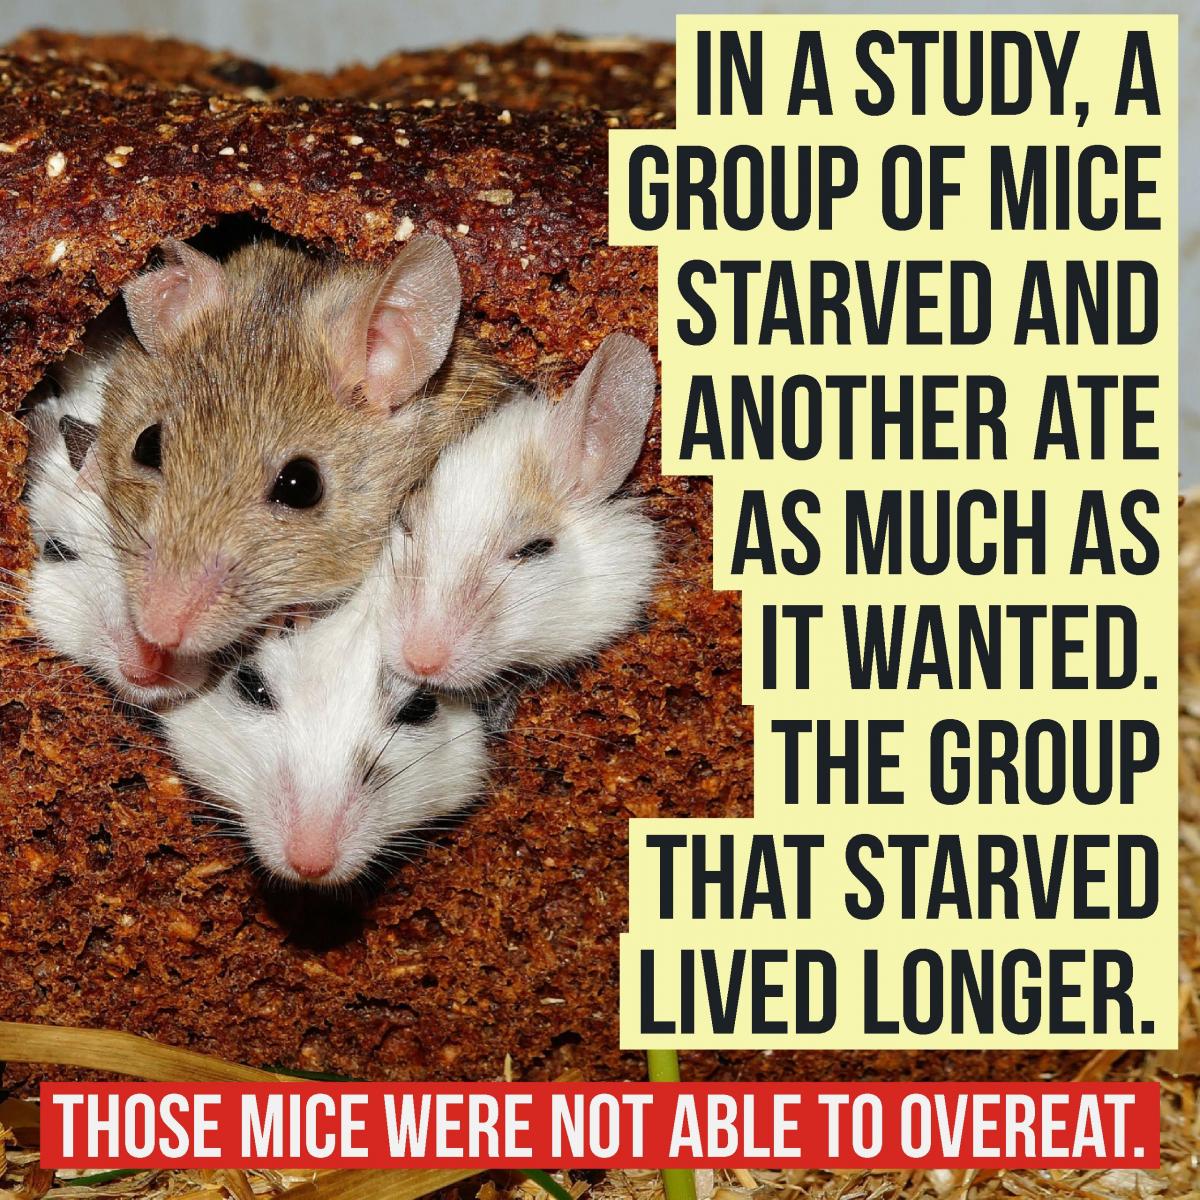 cute mice huddled together with statistics about mice and healthy eating